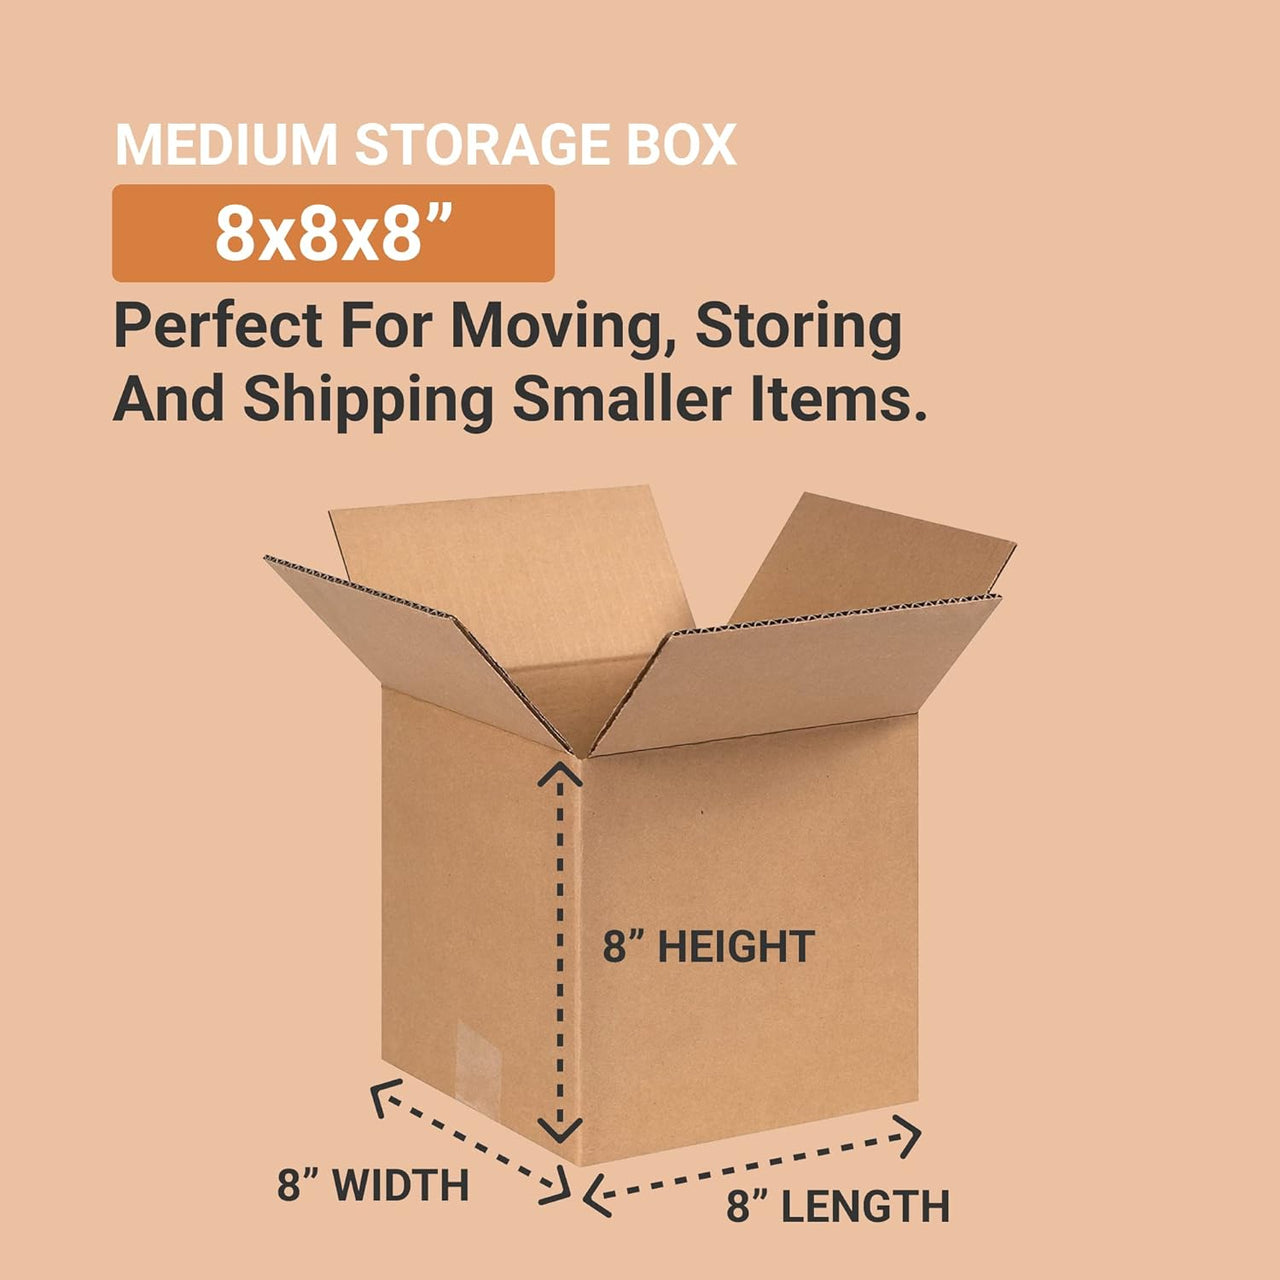 Shipping Boxes 8"L x 8"W x 8"H 25-Pack Corrugated Cardboard Box for Packing Moving Storage